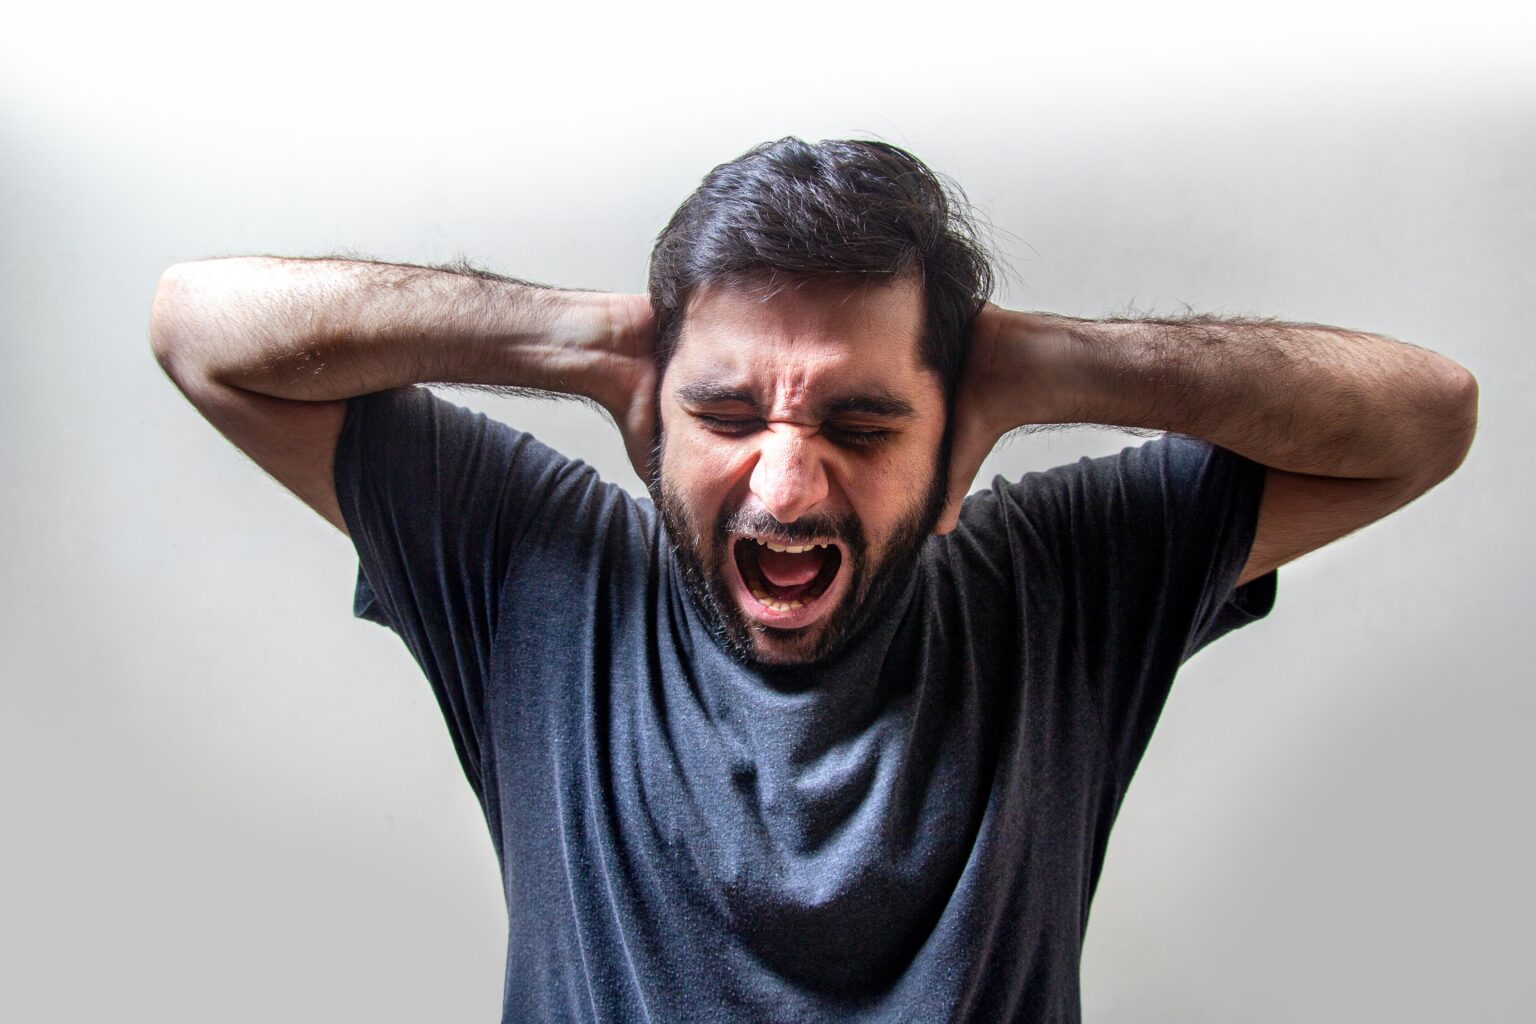 man holding both of his hands up to each side of his head. He is making a rage screaming face in anger